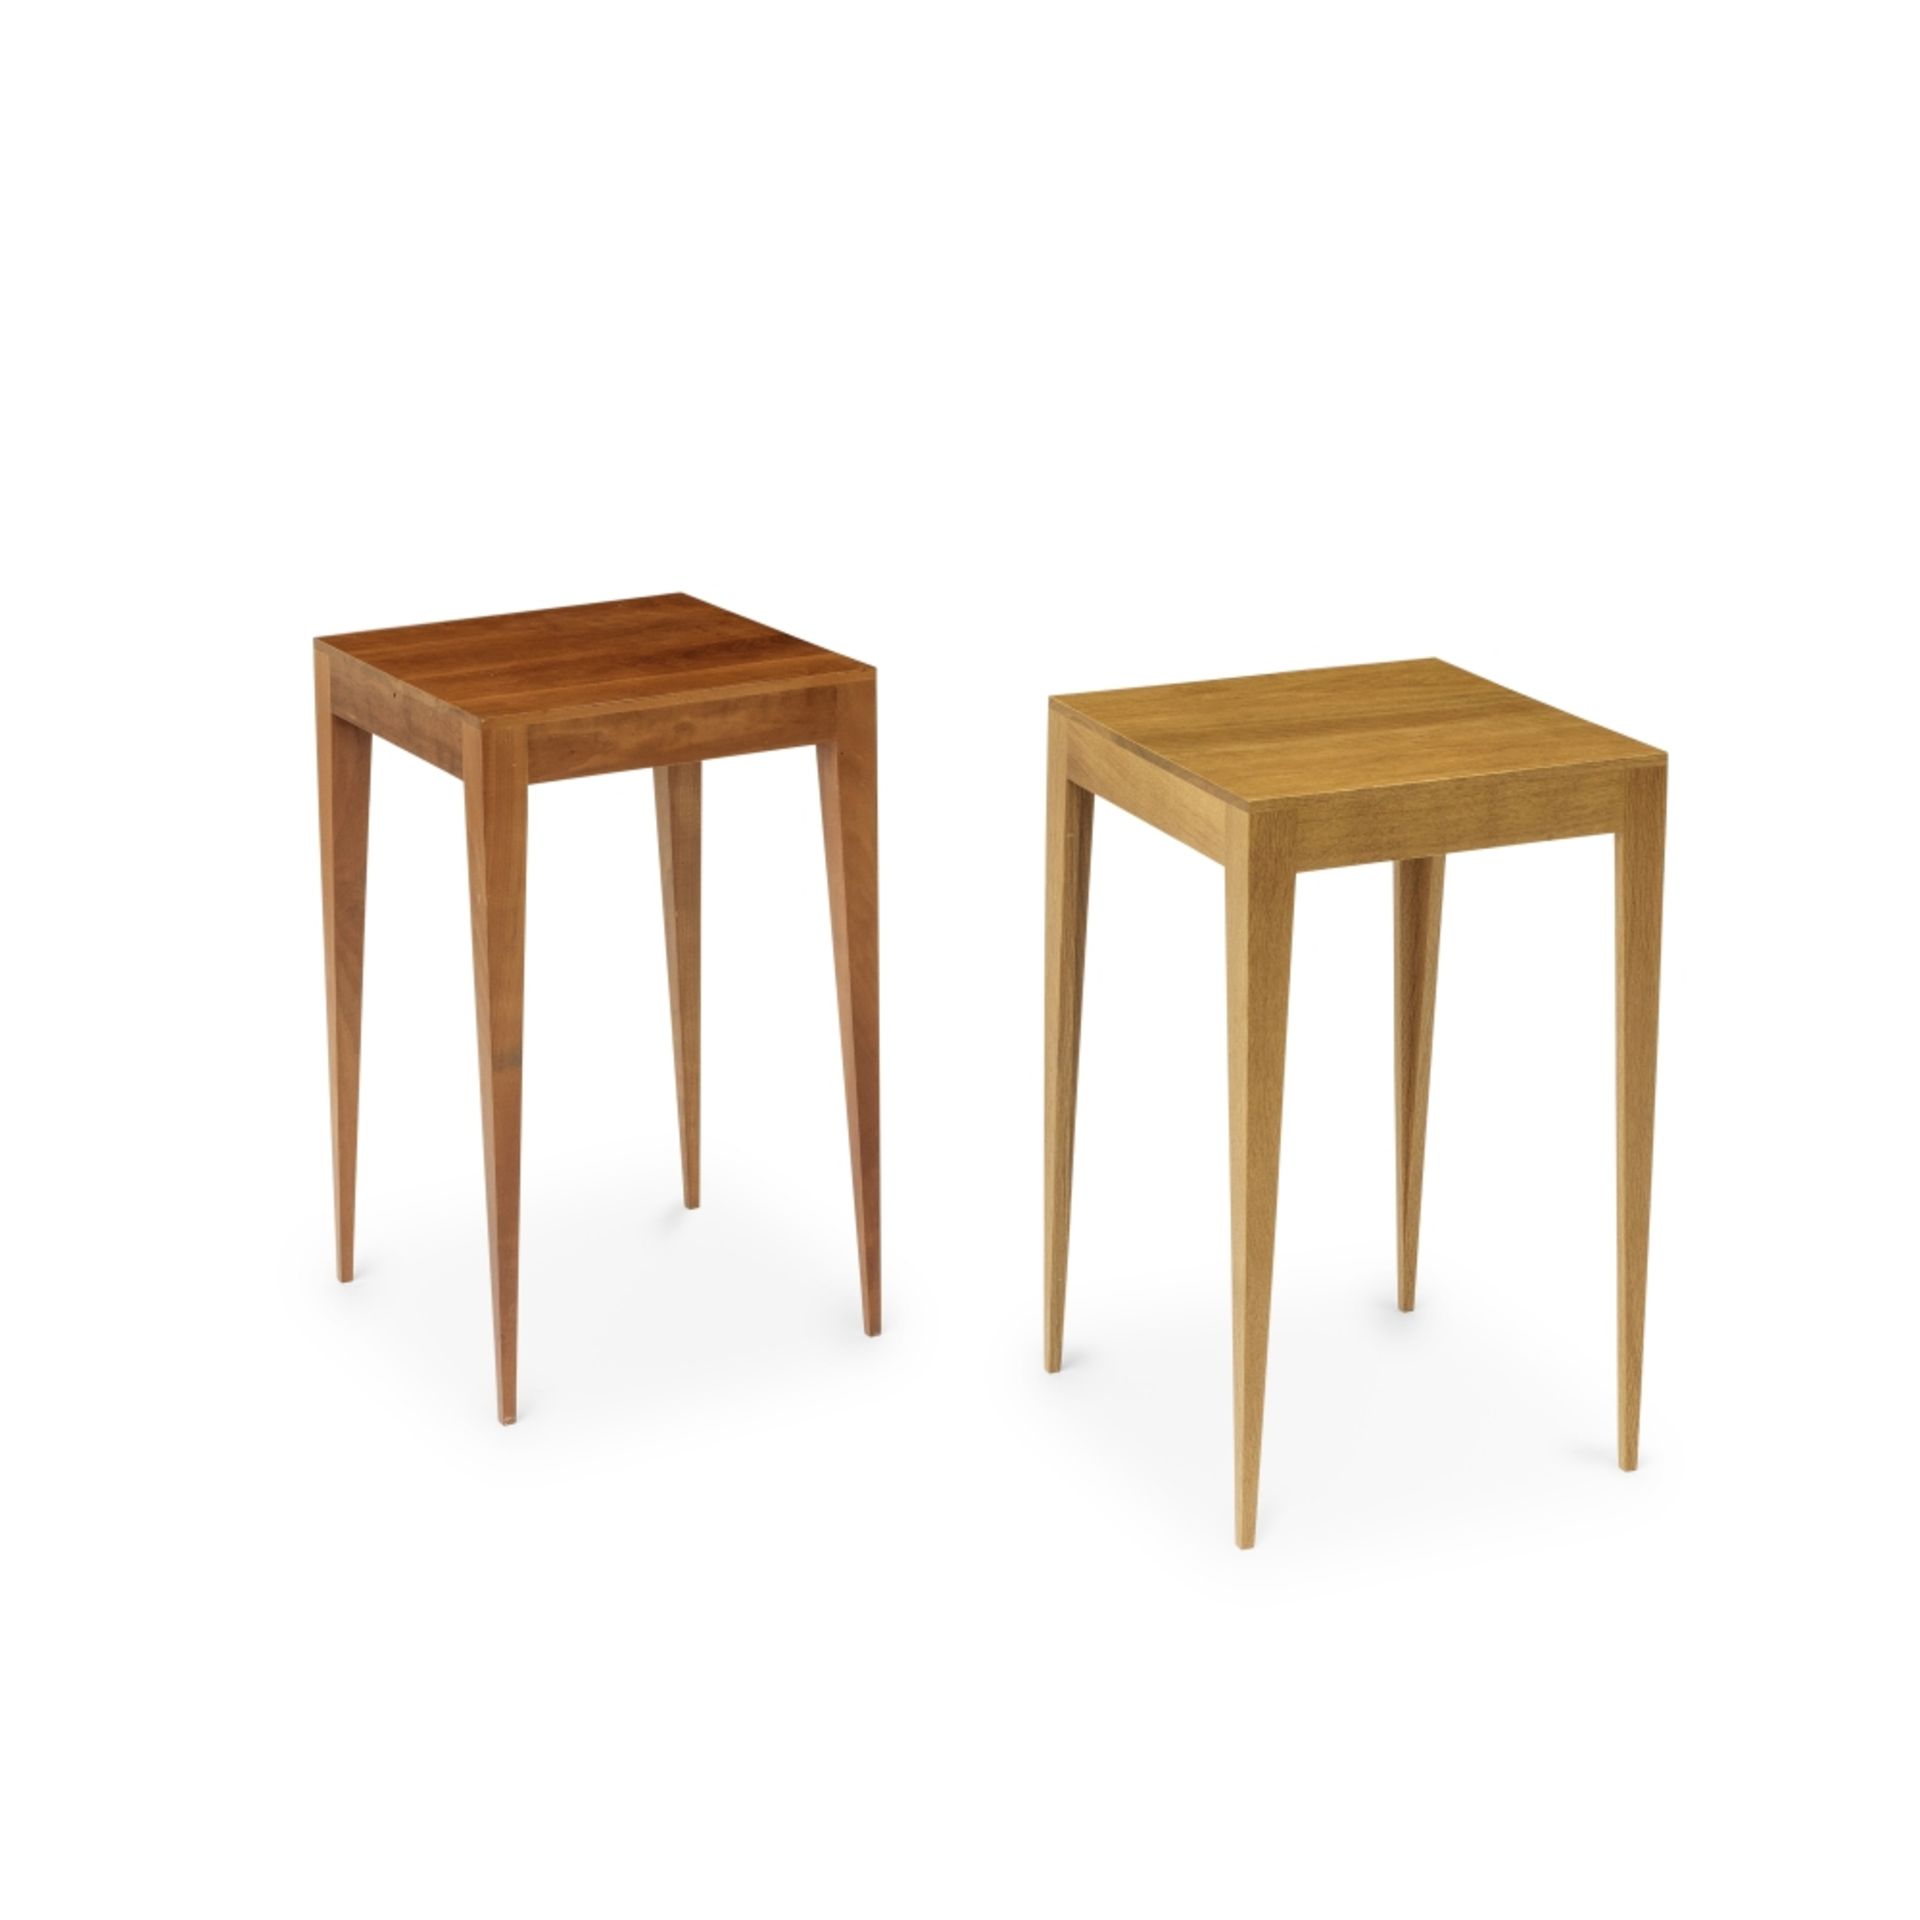 A matched pair of stiletto tablesDesigned by Sir Terence Conran, made by Benchmark Furniture (2)